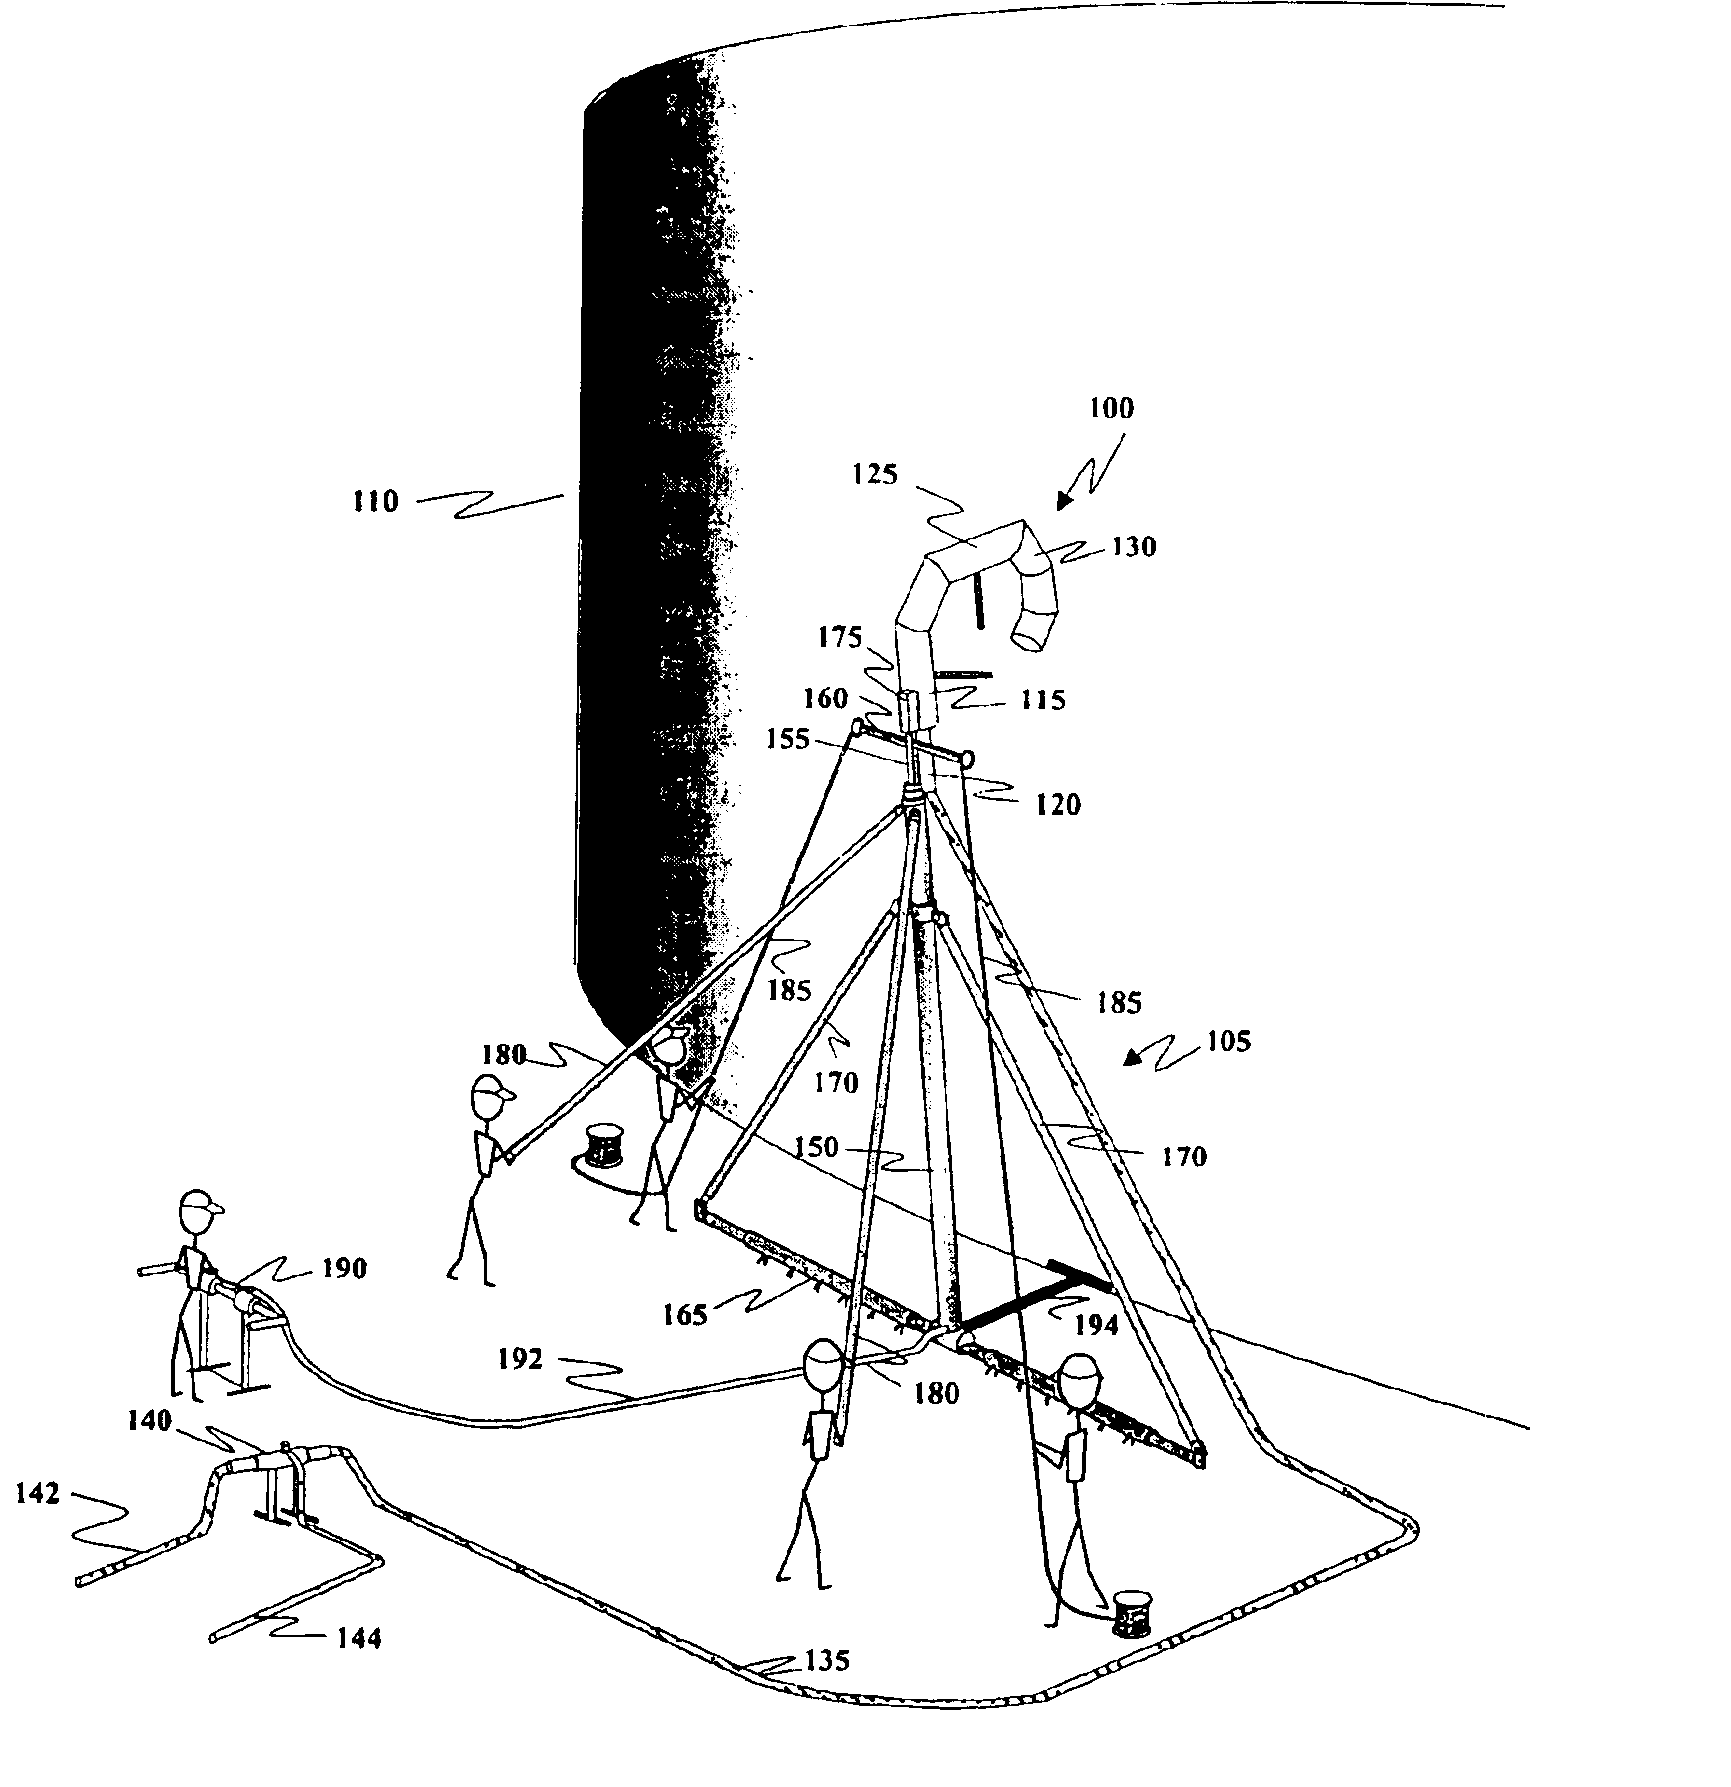 Method and apparatus for extinguishing fires in storage vessels containing flammable or combustible liquids